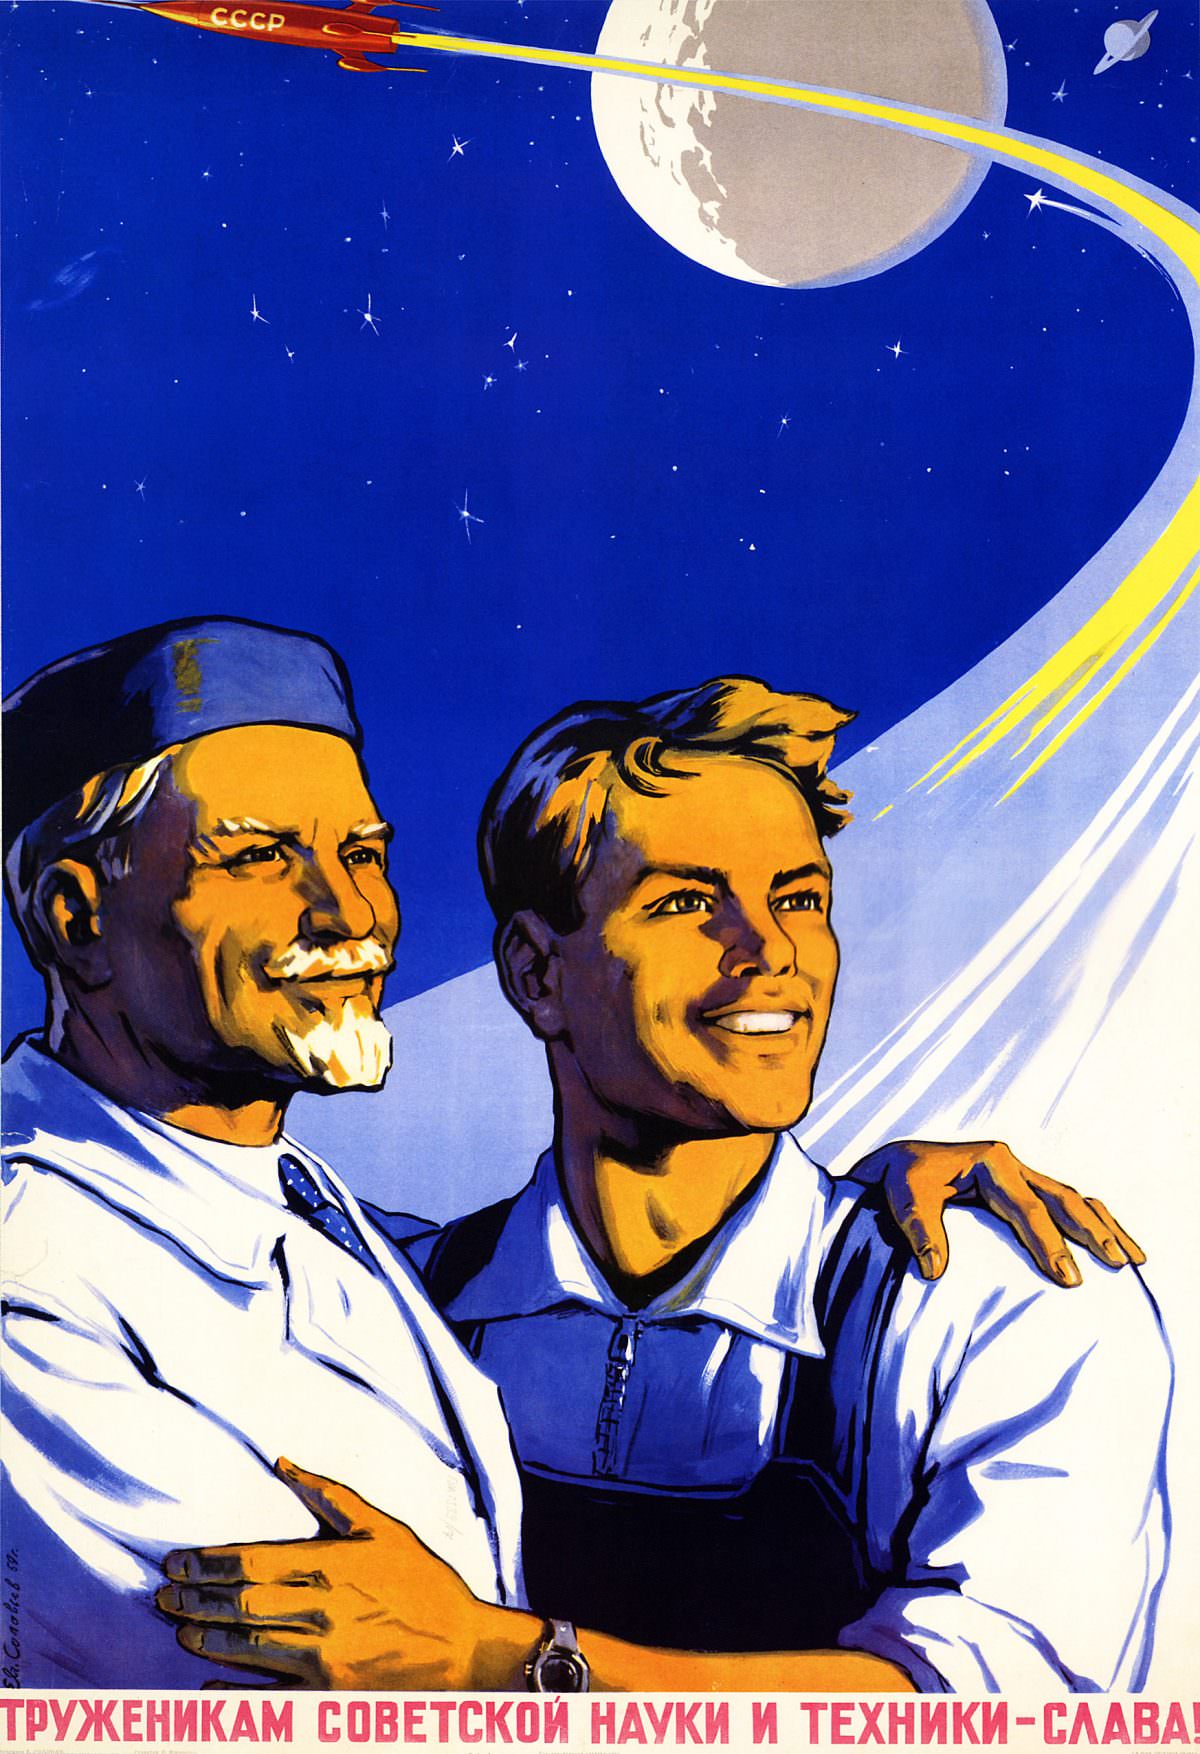 Glory to the workers of Soviet science and technology!